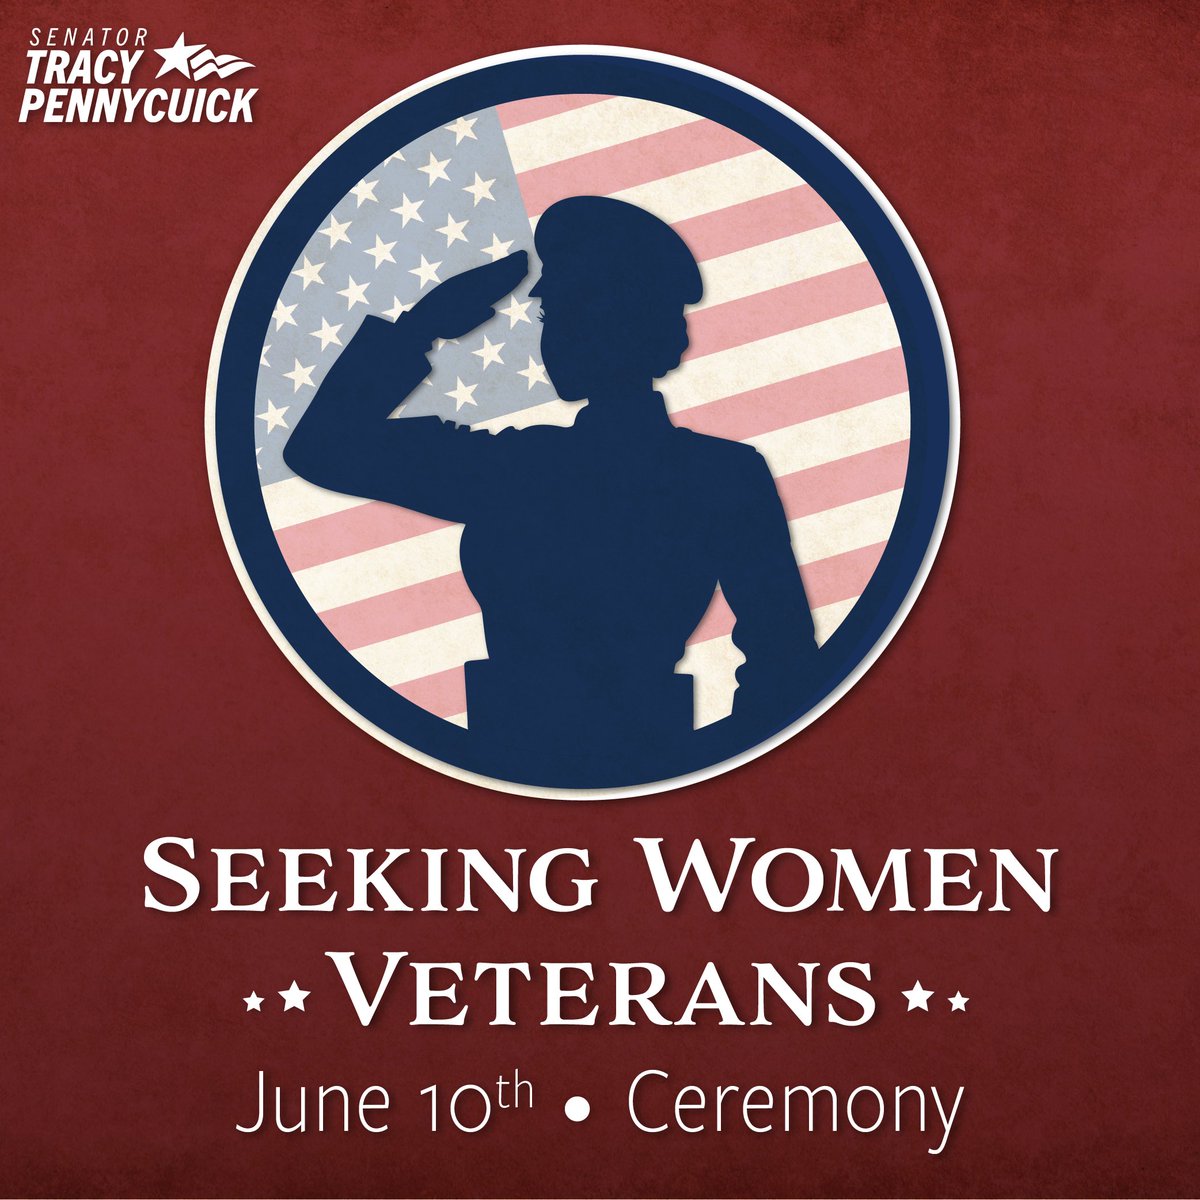 Do you know a PA woman who served in the armed forces? We want to honor them at a women #veterans ceremony with a Capitol exhibit featuring their photos and biographies. Registration deadline is April 5. 

Interested in participating? ➡️ bit.ly/4avM88e